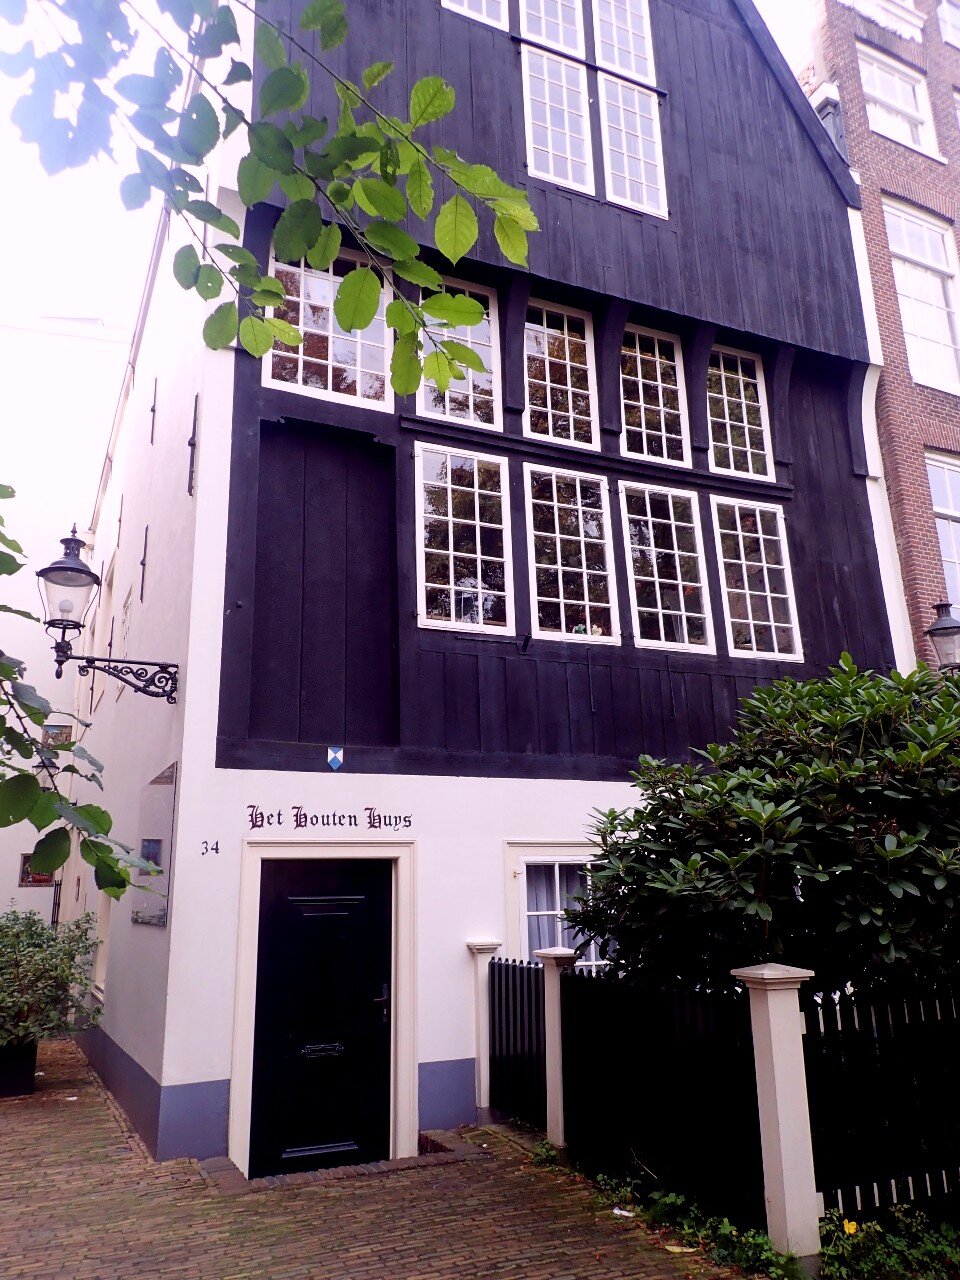 Oldest Timber Building in Amsterdam